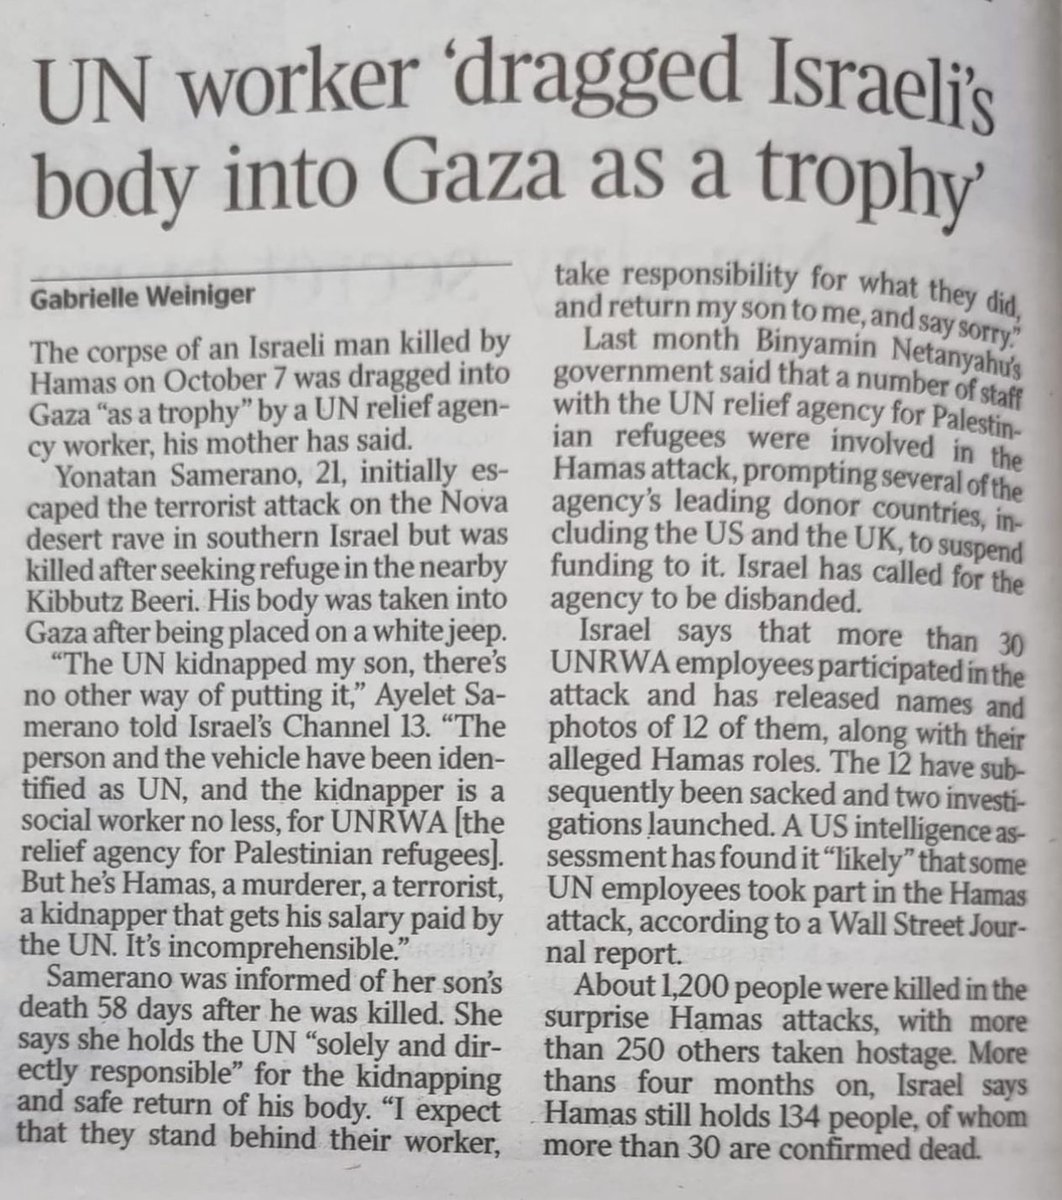 “The U.N. kidnapped my son.” Time to end UNRWA.